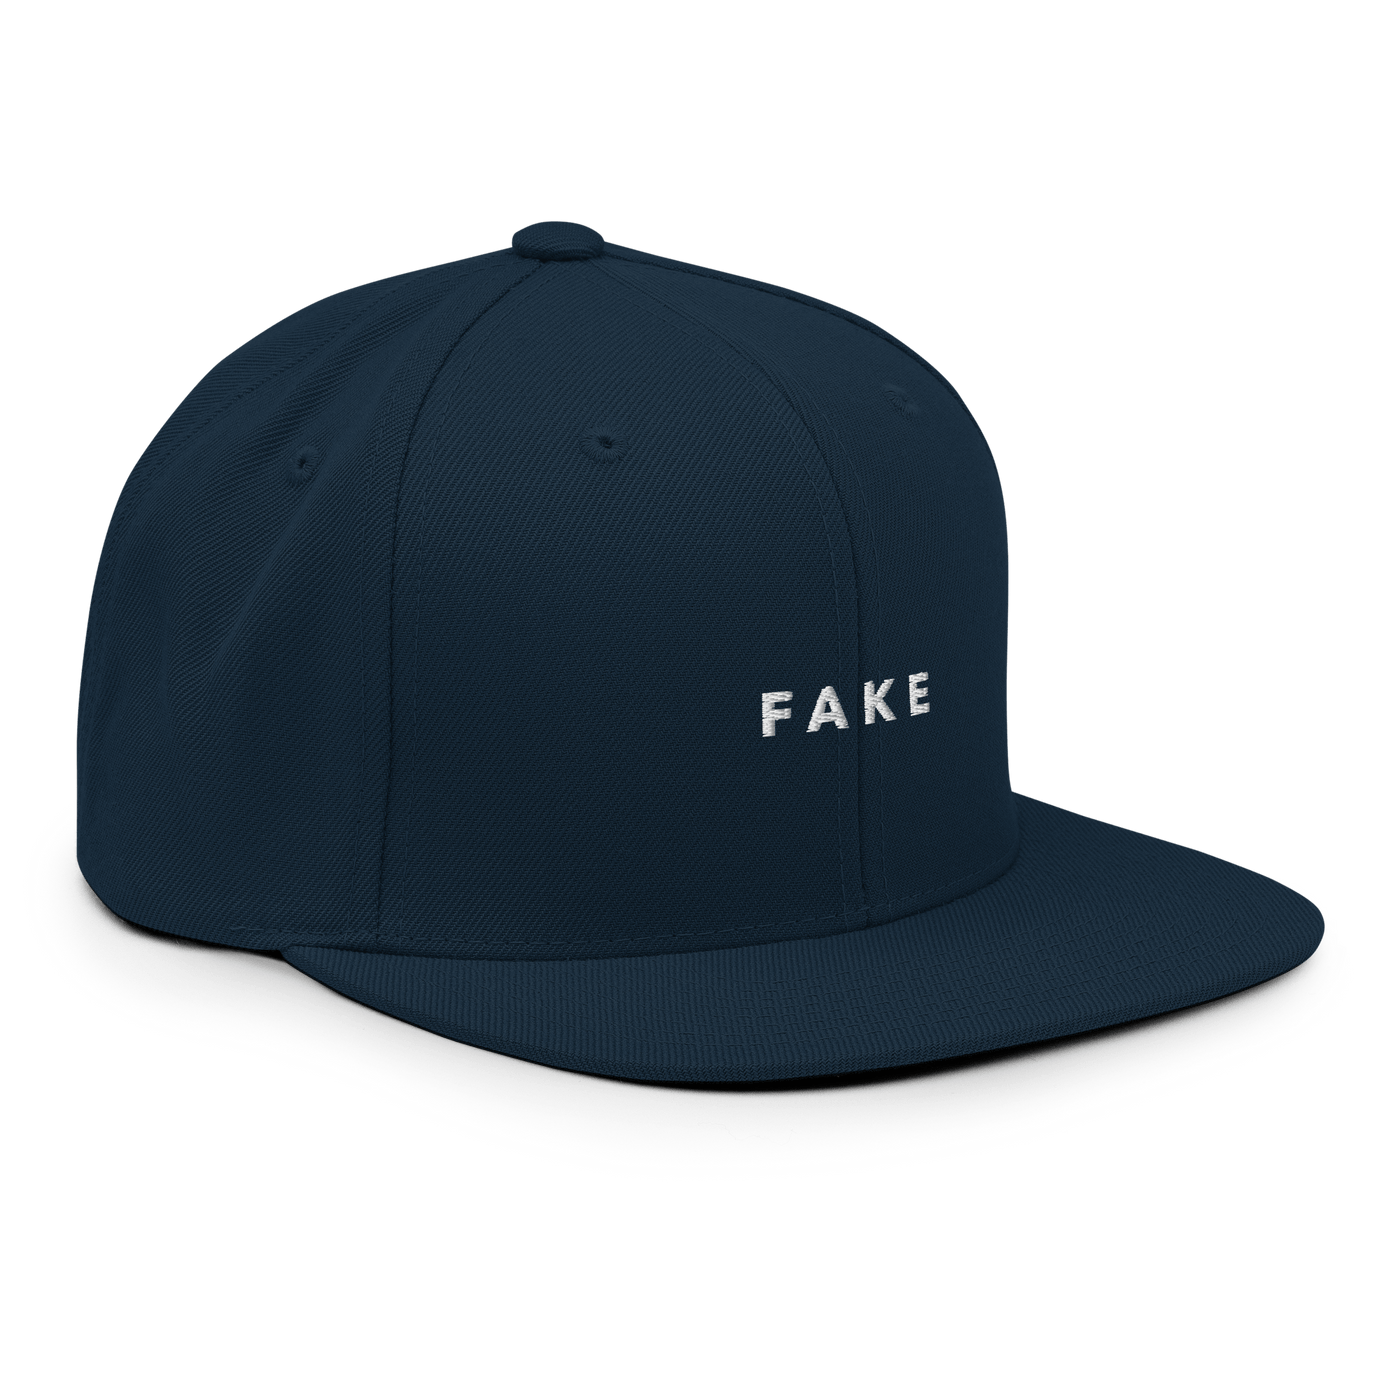 FAKE Snapback Hat - Dark Navy - - Just Another Cap Store